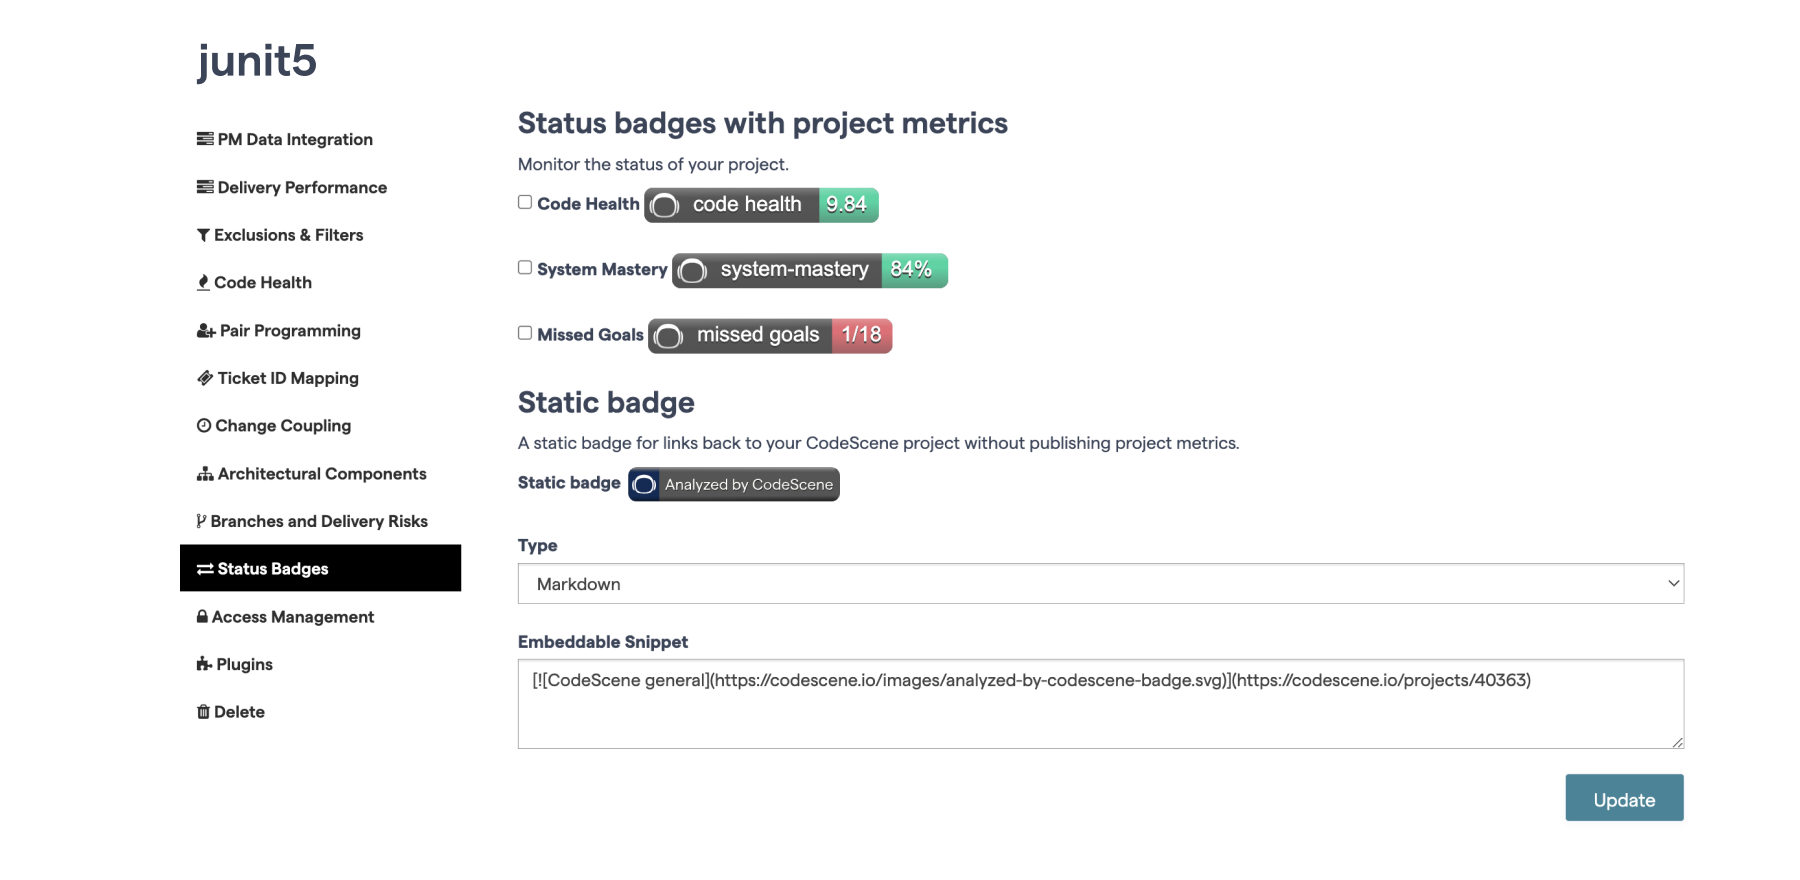 CodeScene generates markup and HTML for status badges.